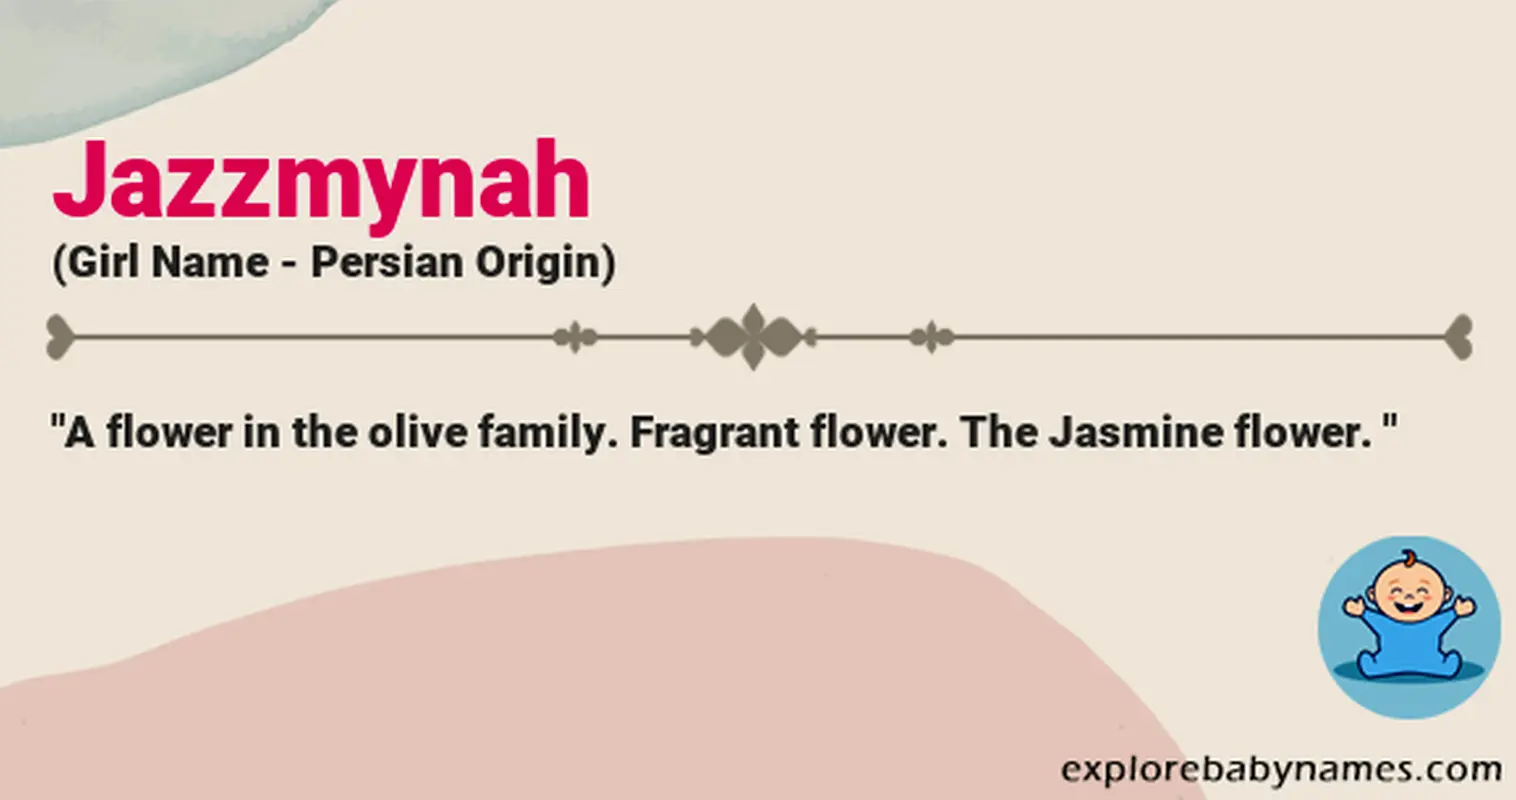 Meaning of Jazzmynah